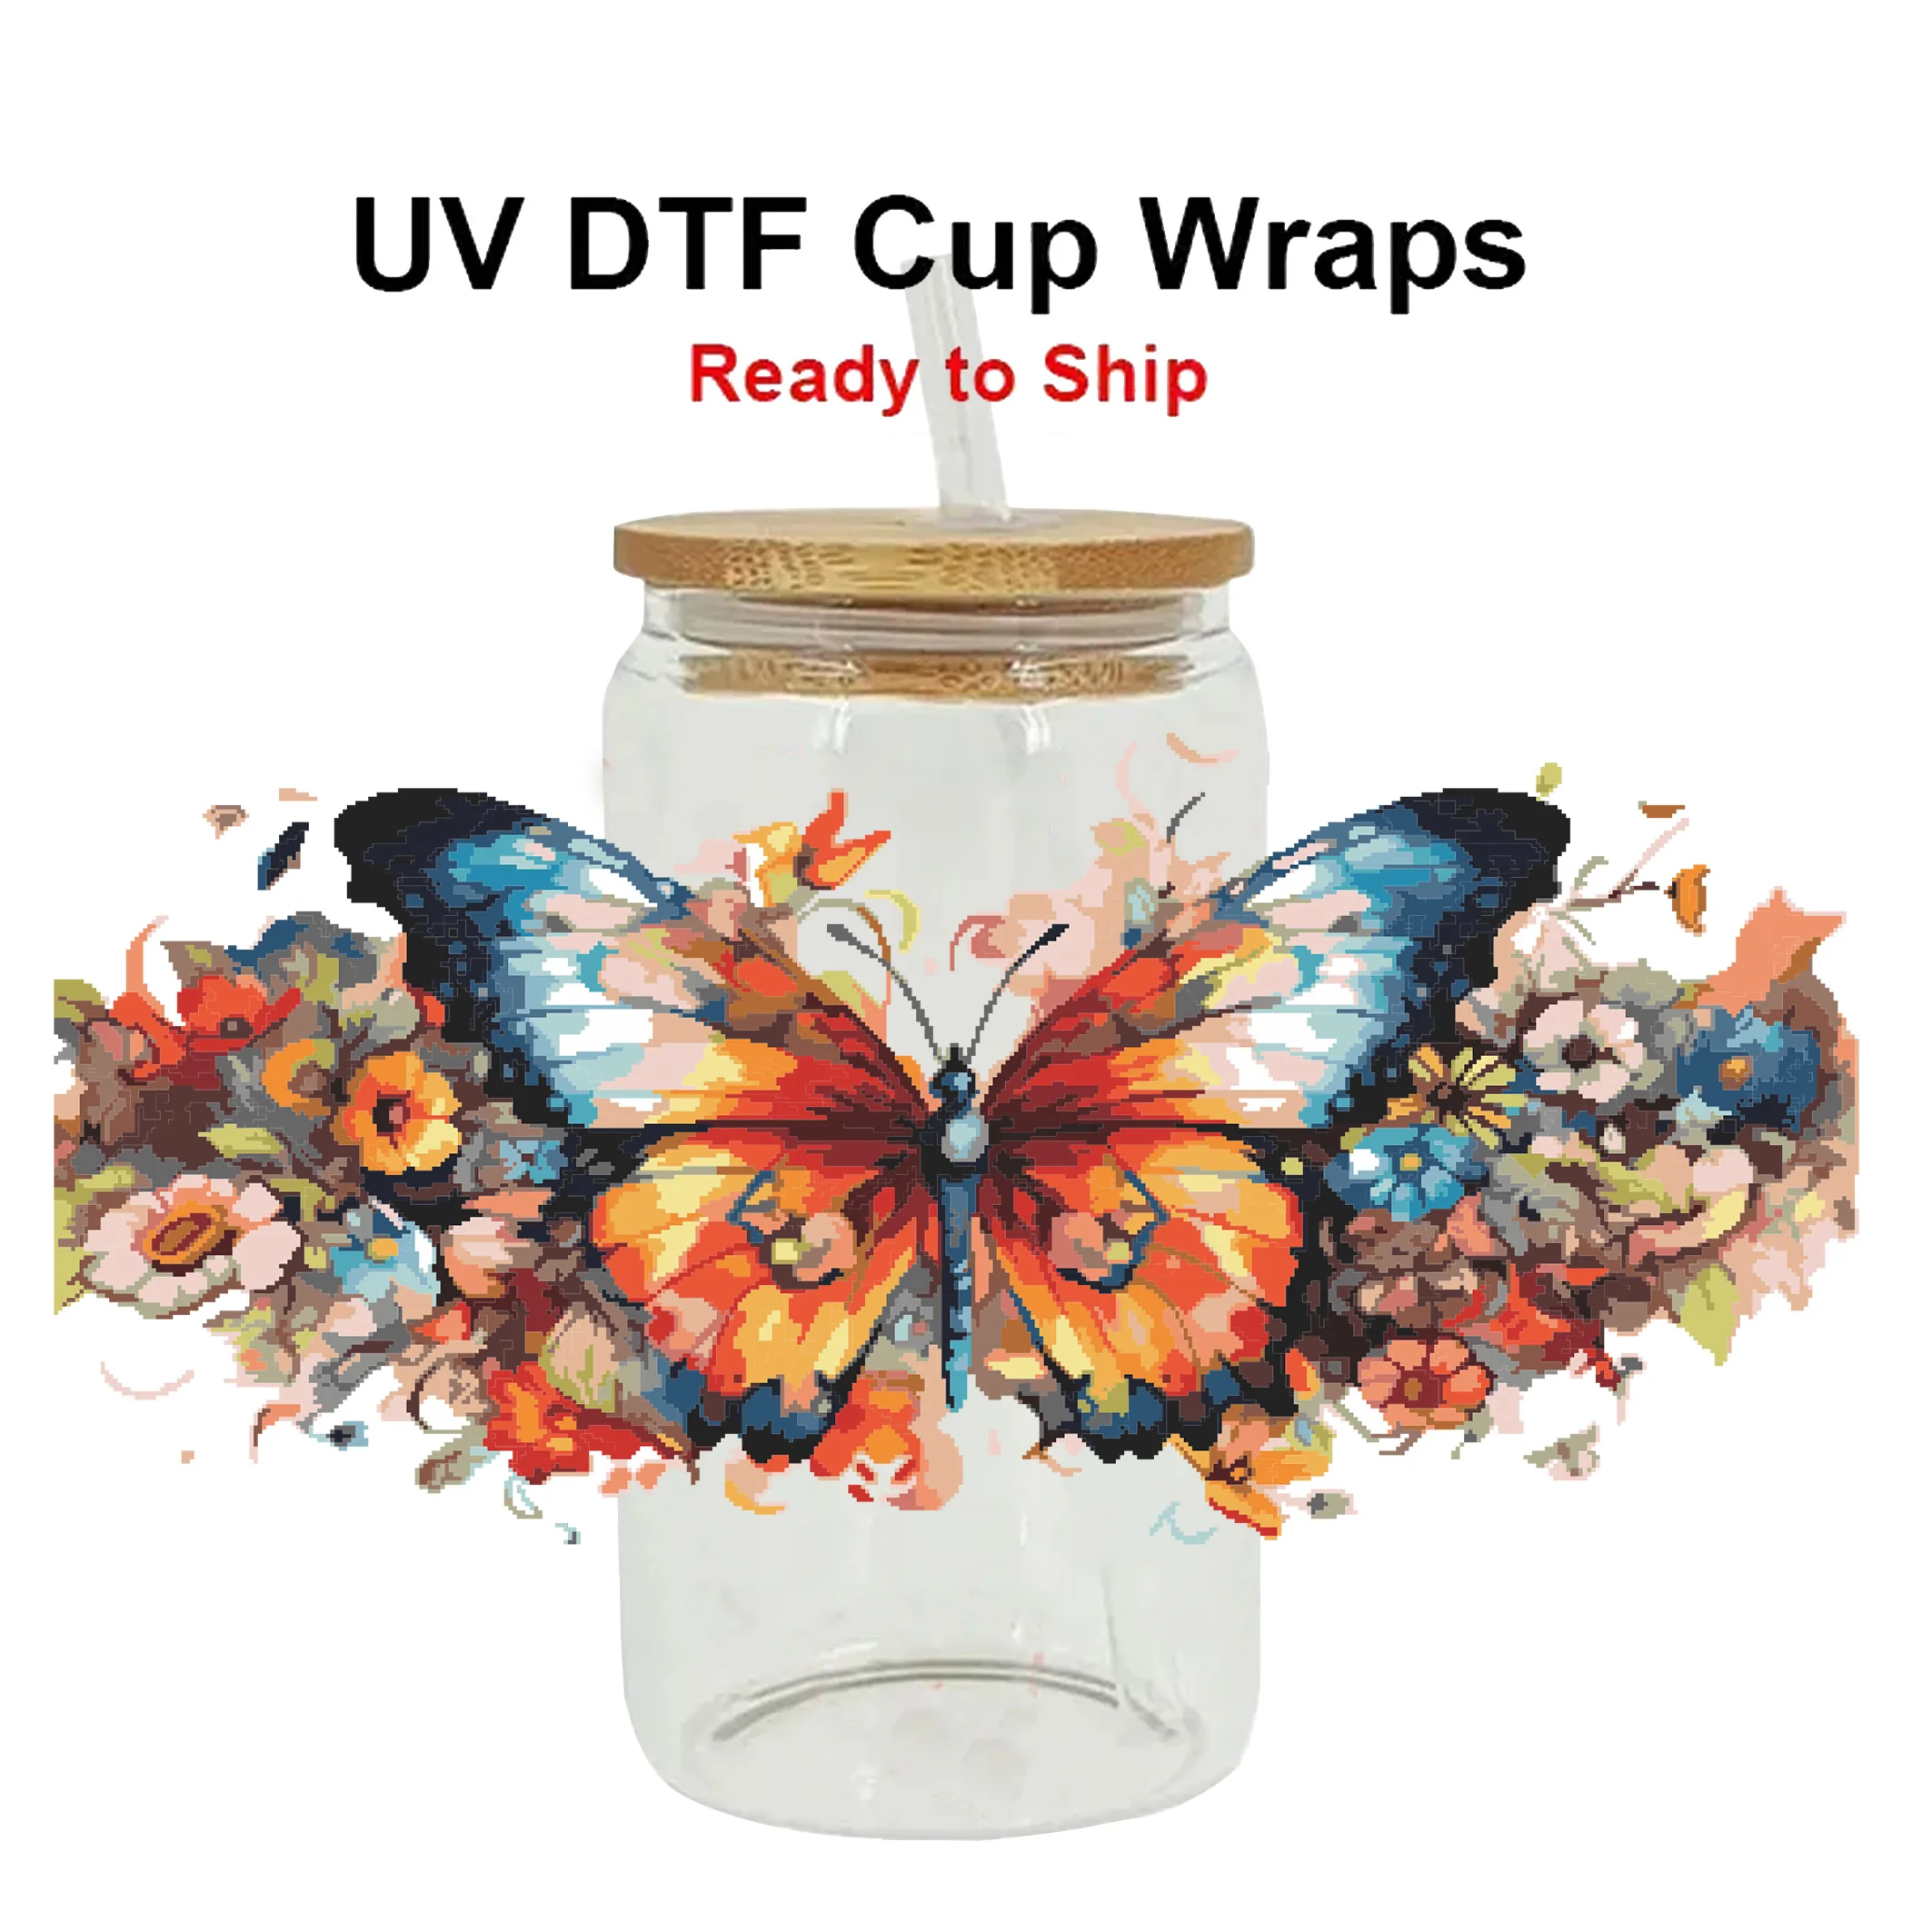 Uv Dtf Cup Wraps Ready to Ship 